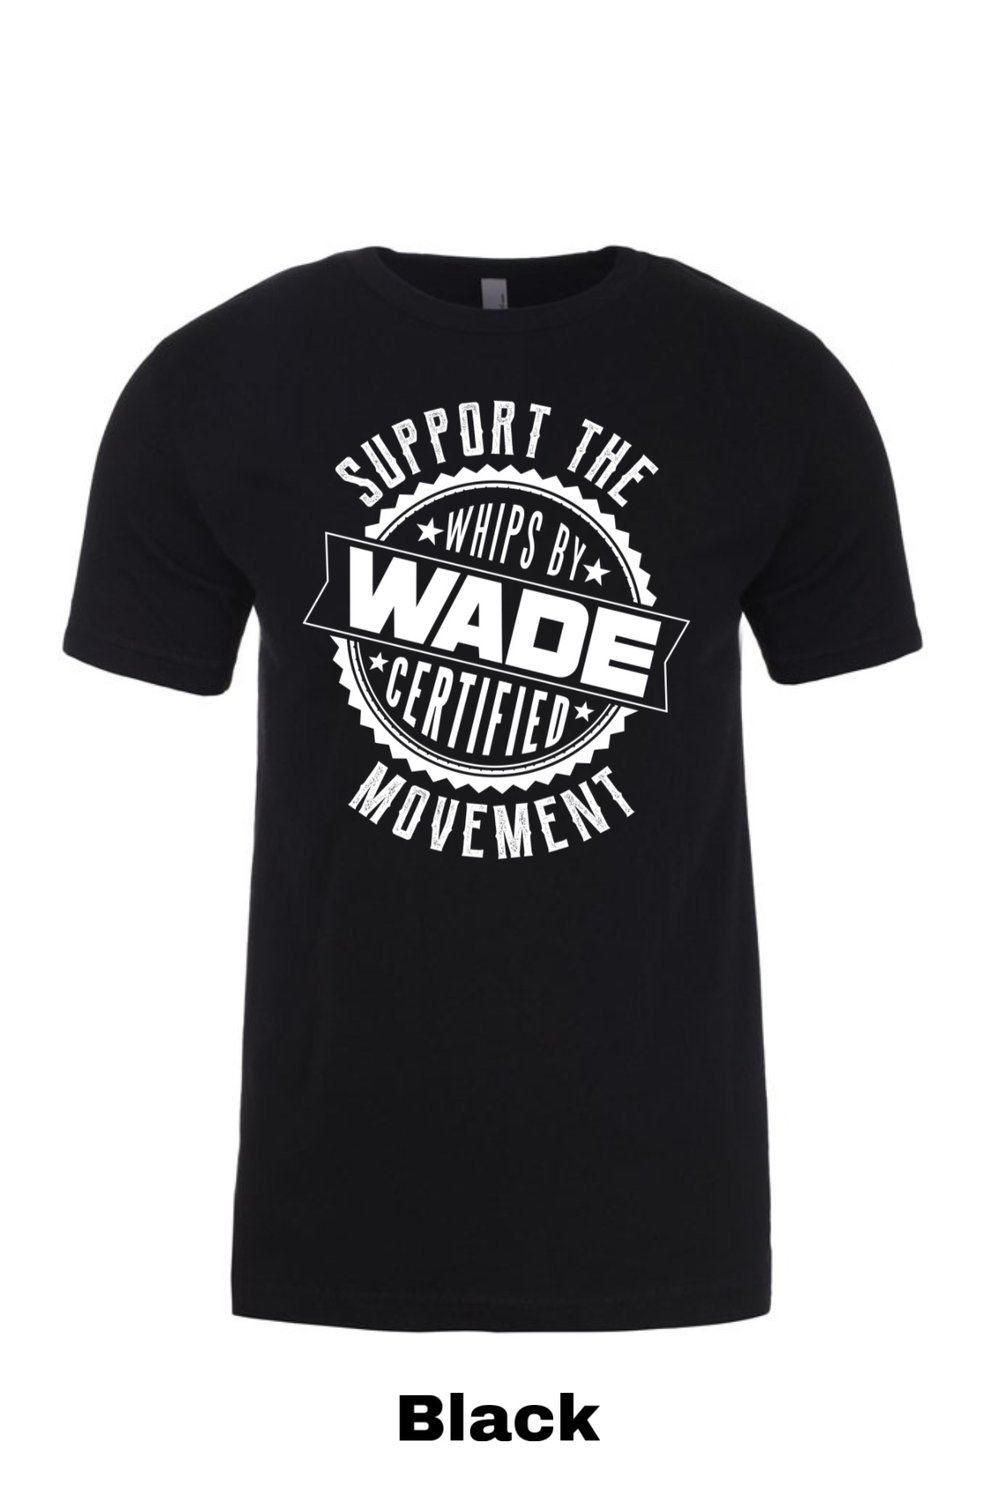 Support The Movement 2020 * PRE ORDER * 